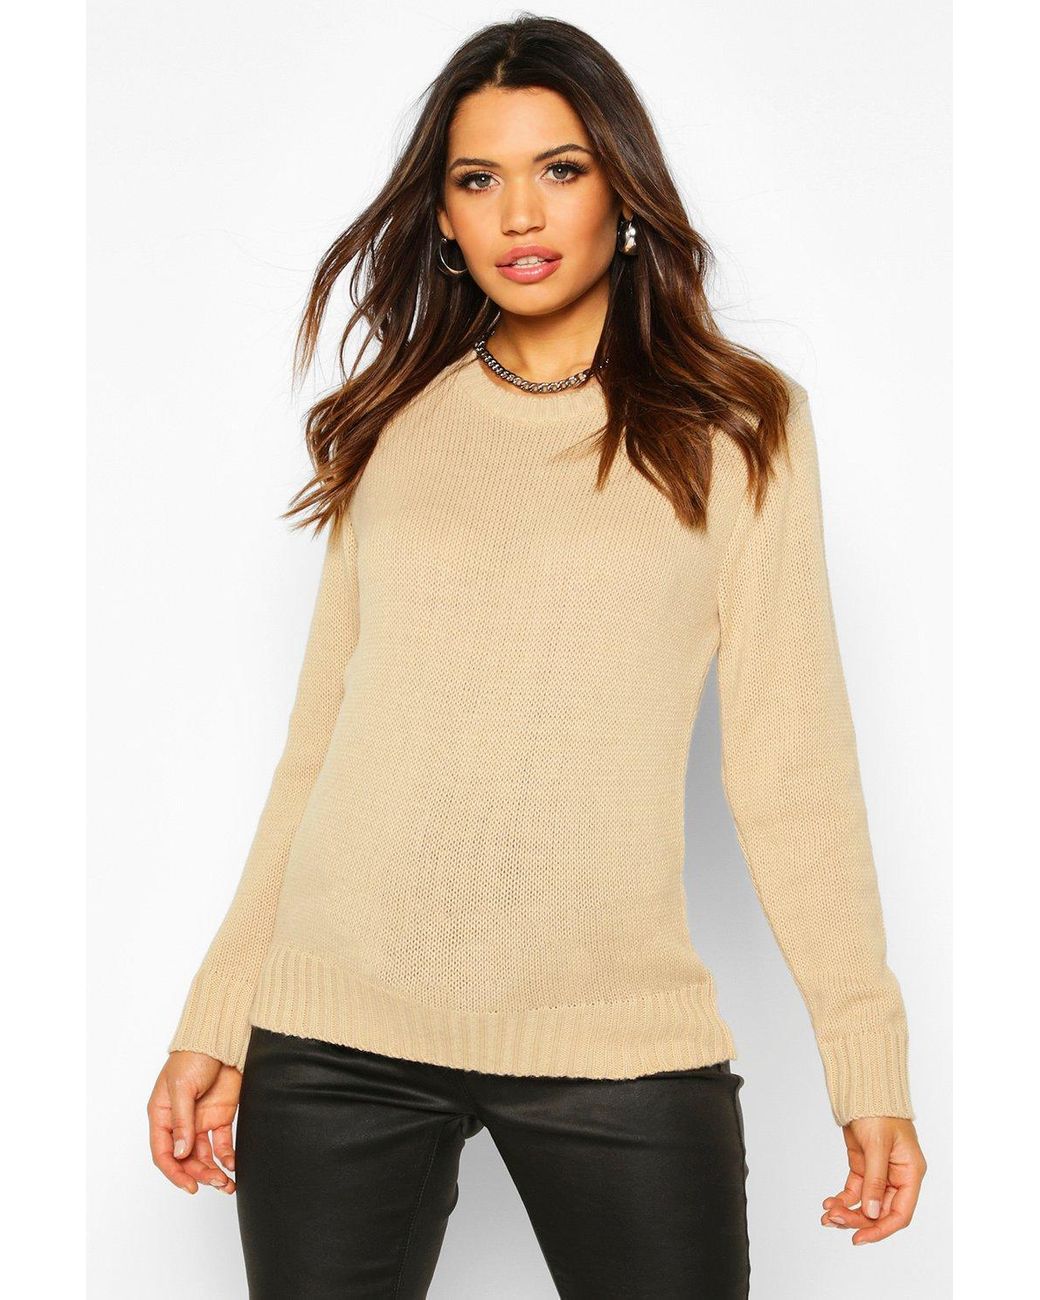 Boohoo Maternity Crew Neck Sweater in Beige (Natural) - Lyst